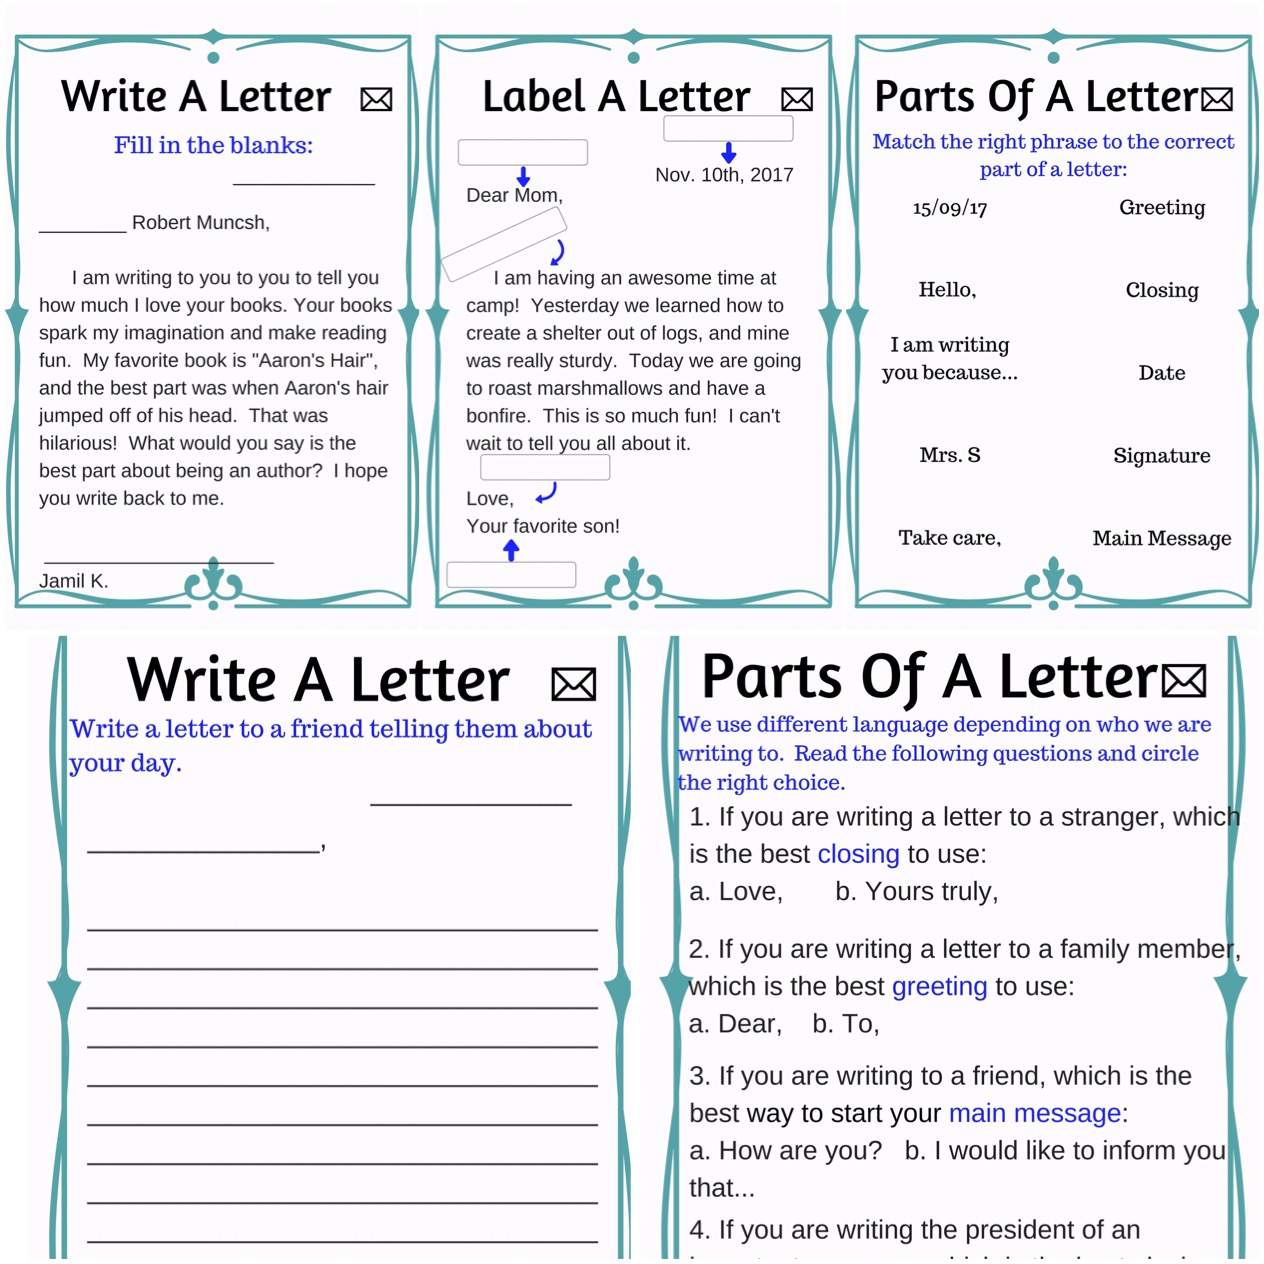 Take write me a letter. How to write a Letter. How to write a Letter in English for Kids. Writing a Letter to a friend. How to write a Letter to a friend.